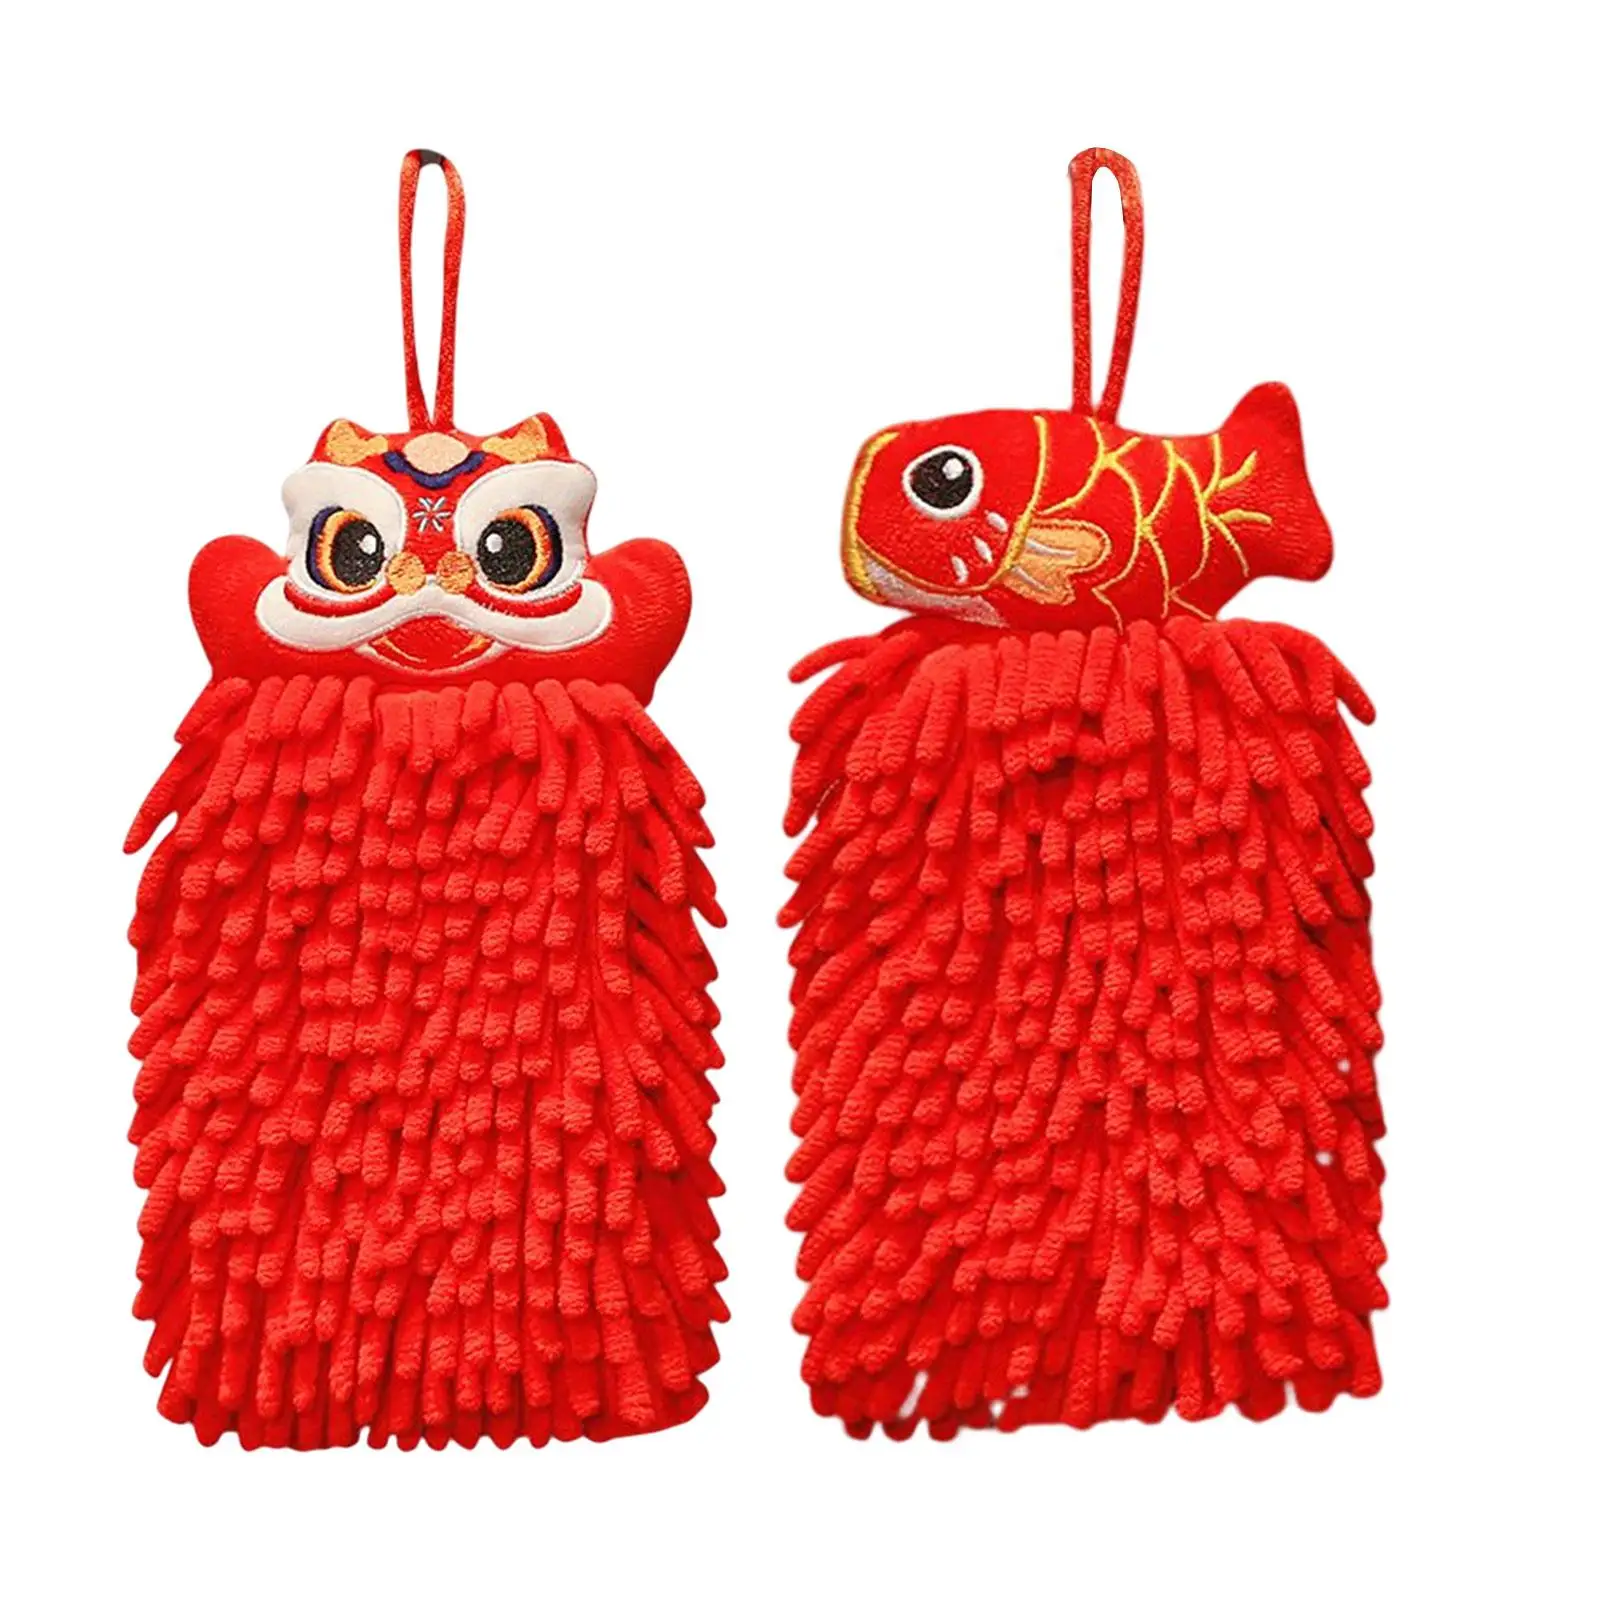 Cute Animal Hand Towels Fast Drying Dishcloth with Hanging Loop Resuable Towel Washcloths for Washroom Toilet Shower Bathroom